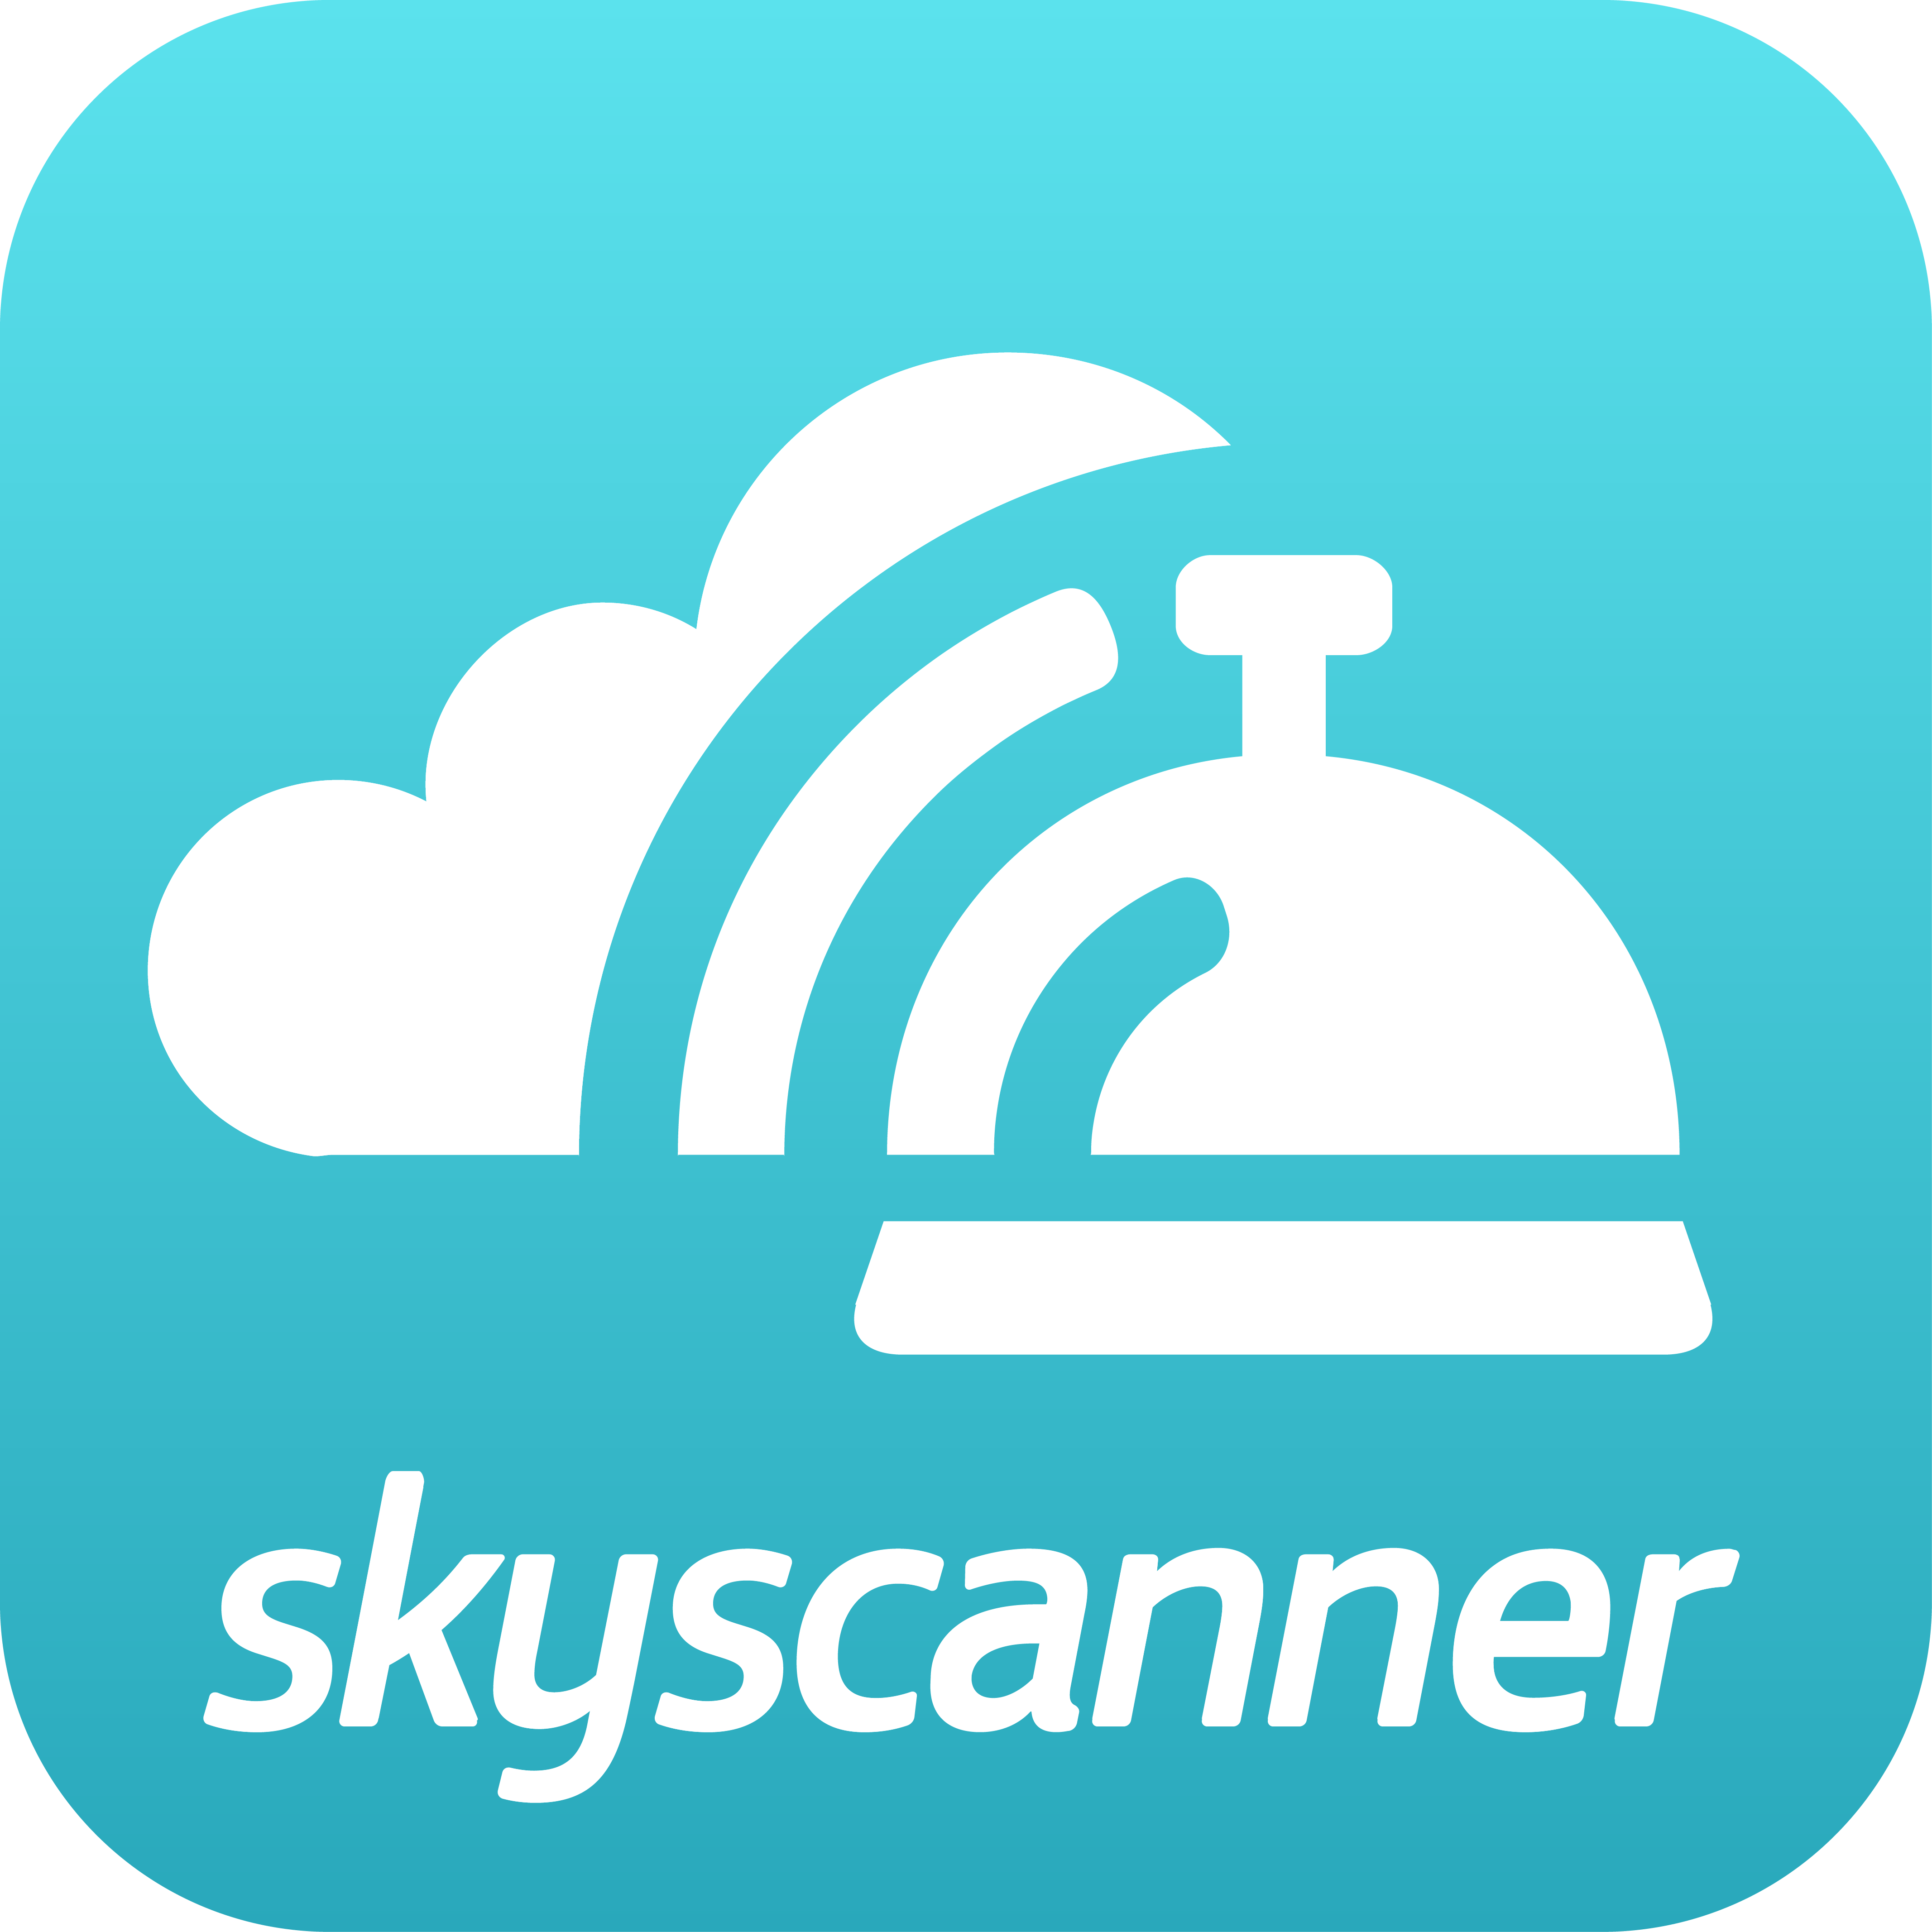 Hotel App Logo - New Skyscanner Hotels App Helps Travelers Find the Perfect Hotel ...